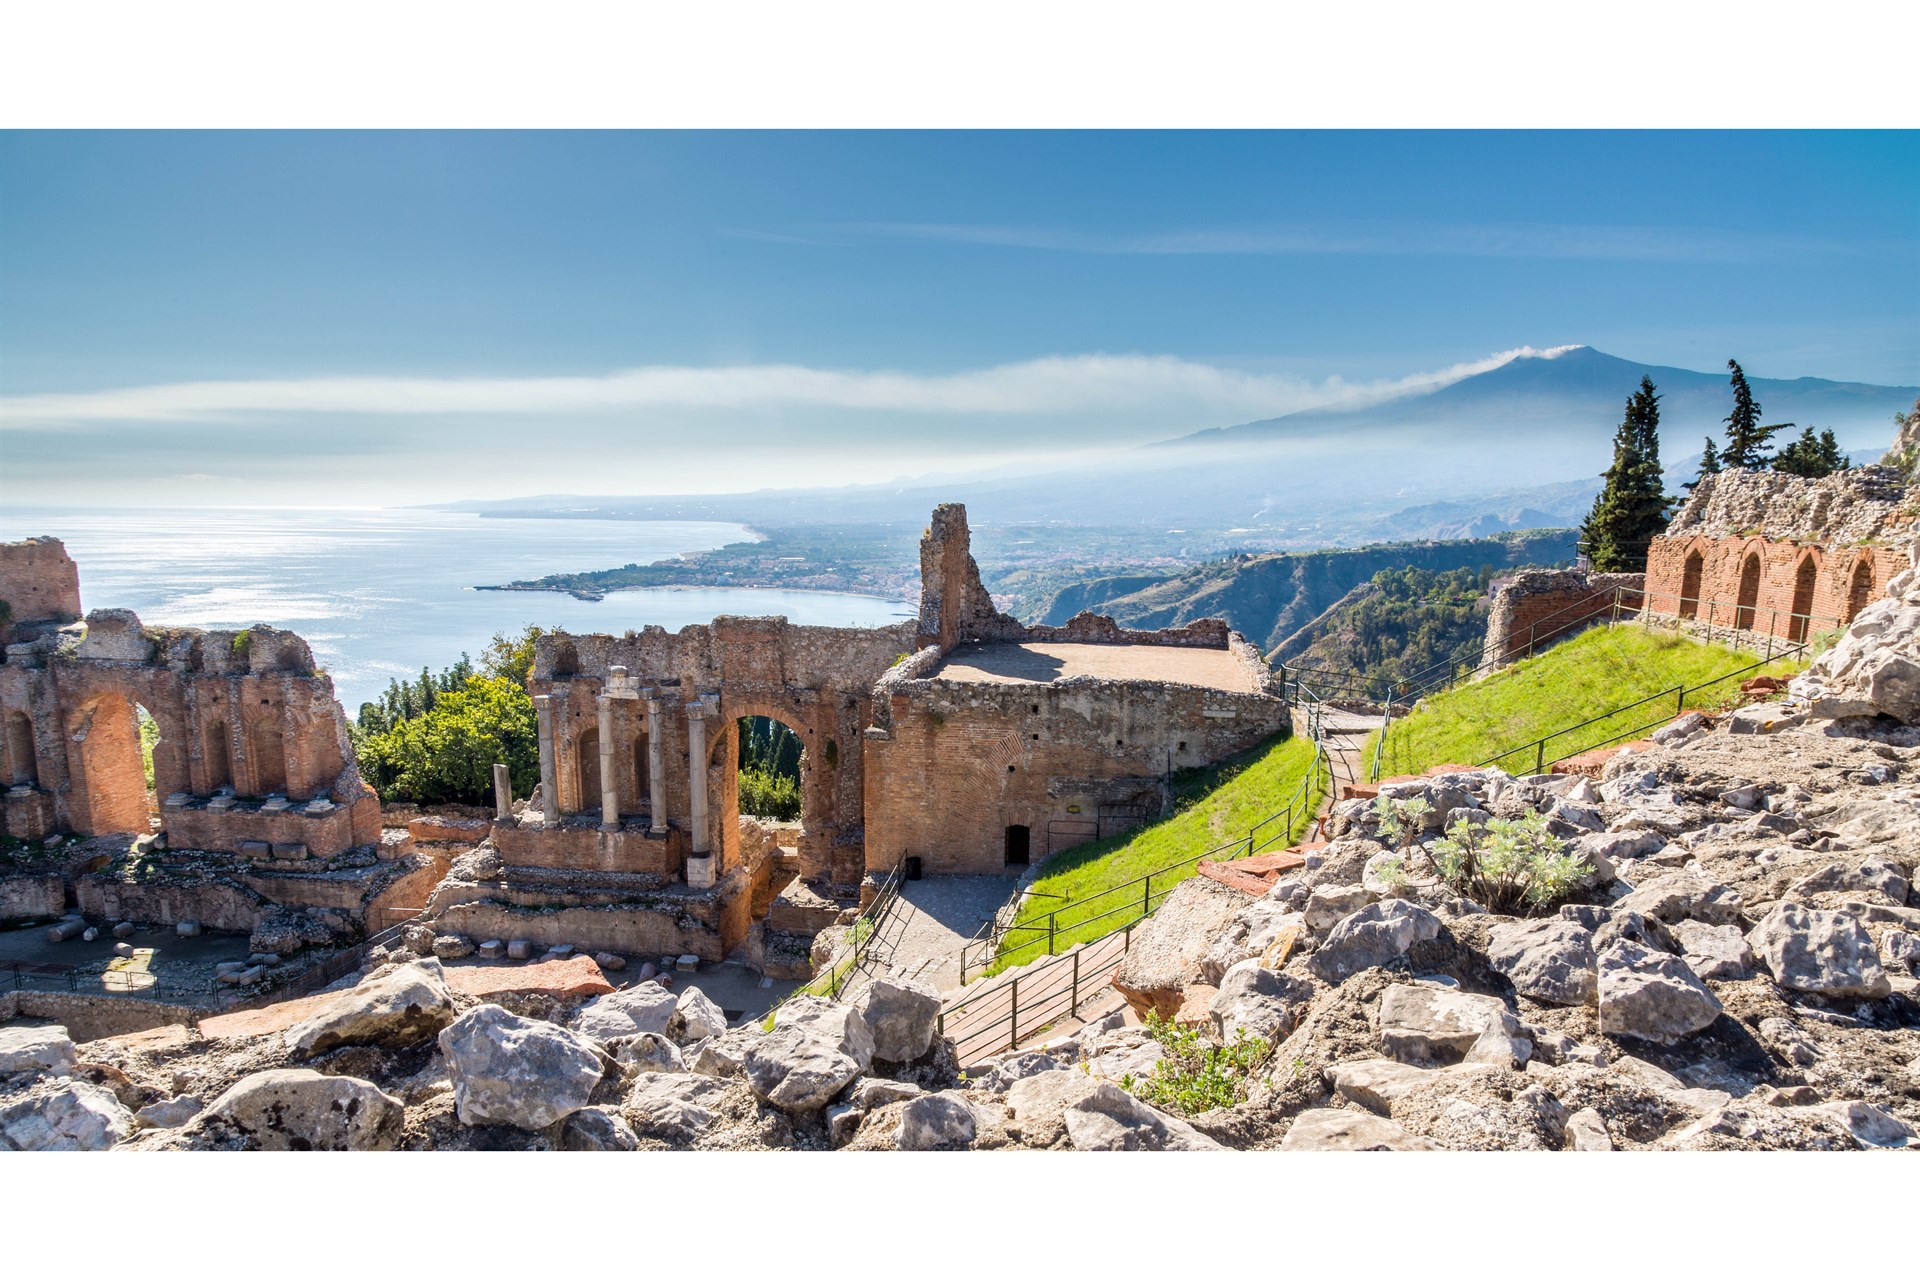 Taormina, Sicily - Information and Culture | The Thinking Traveller